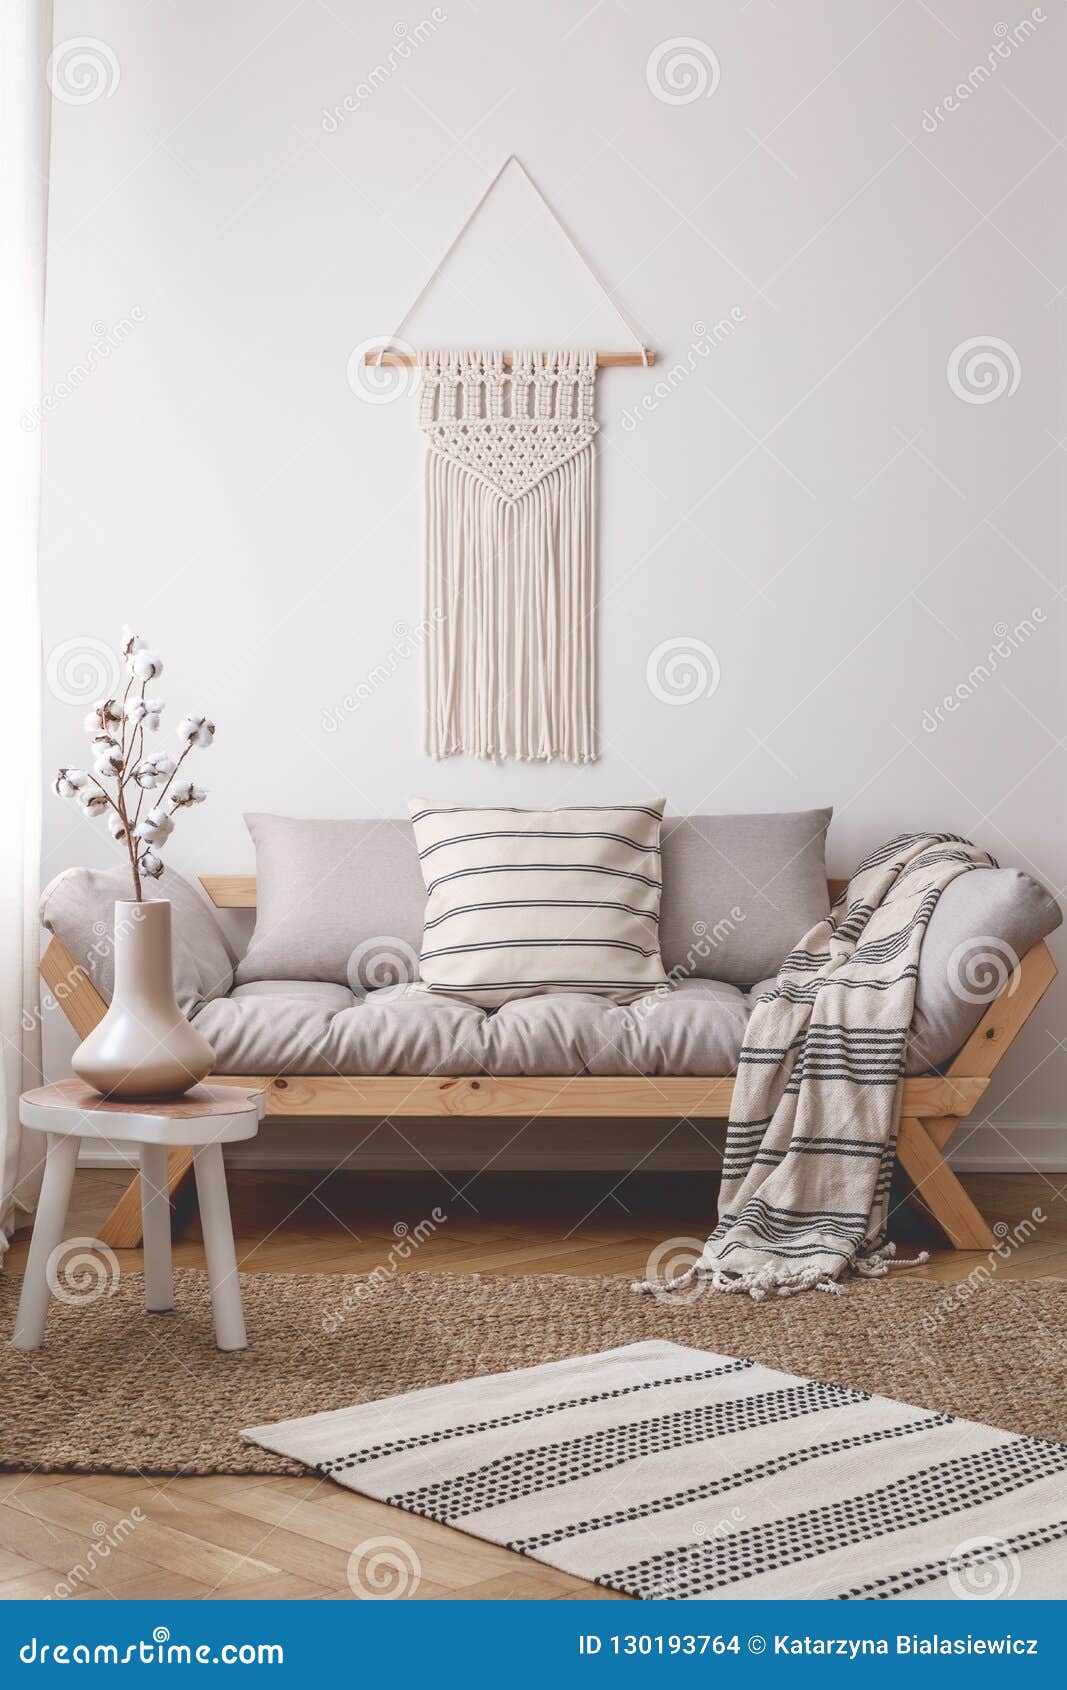 13 769 Wooden Stool Photos Free Royalty Free Stock Photos From Dreamstime